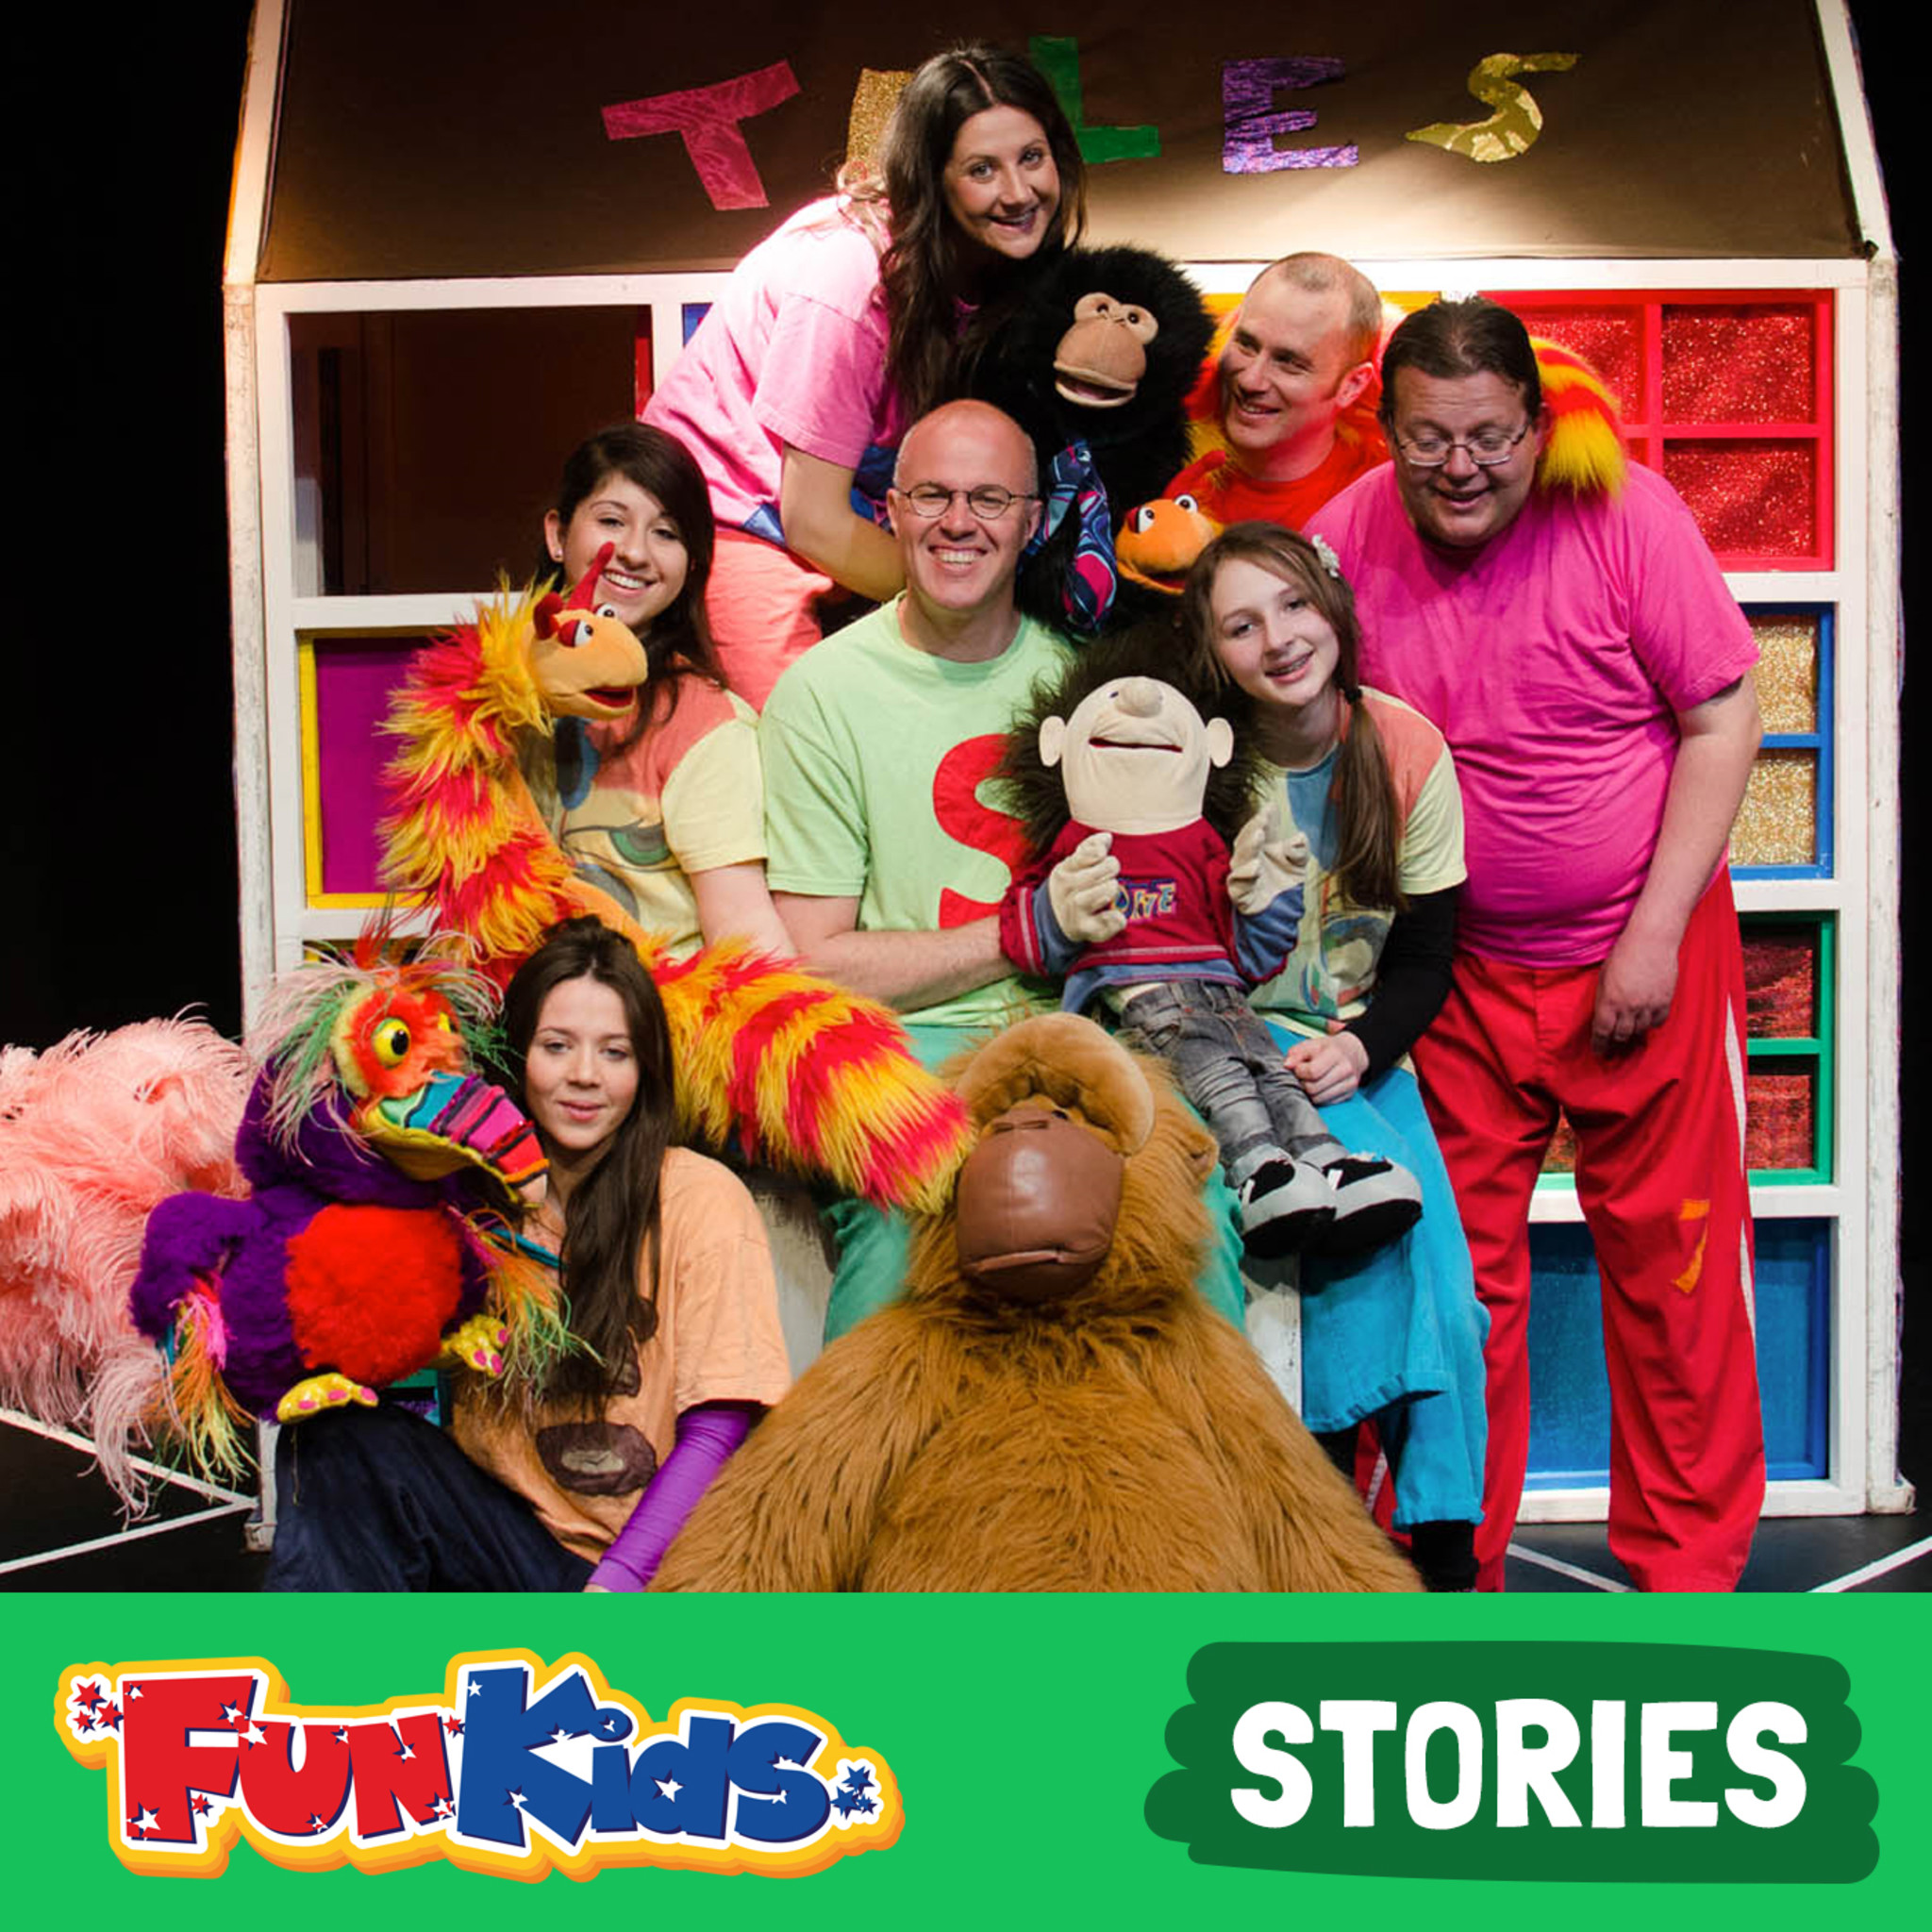 The Tales from the Shed: Funny Stories for Kids from Chickenshed Theatre